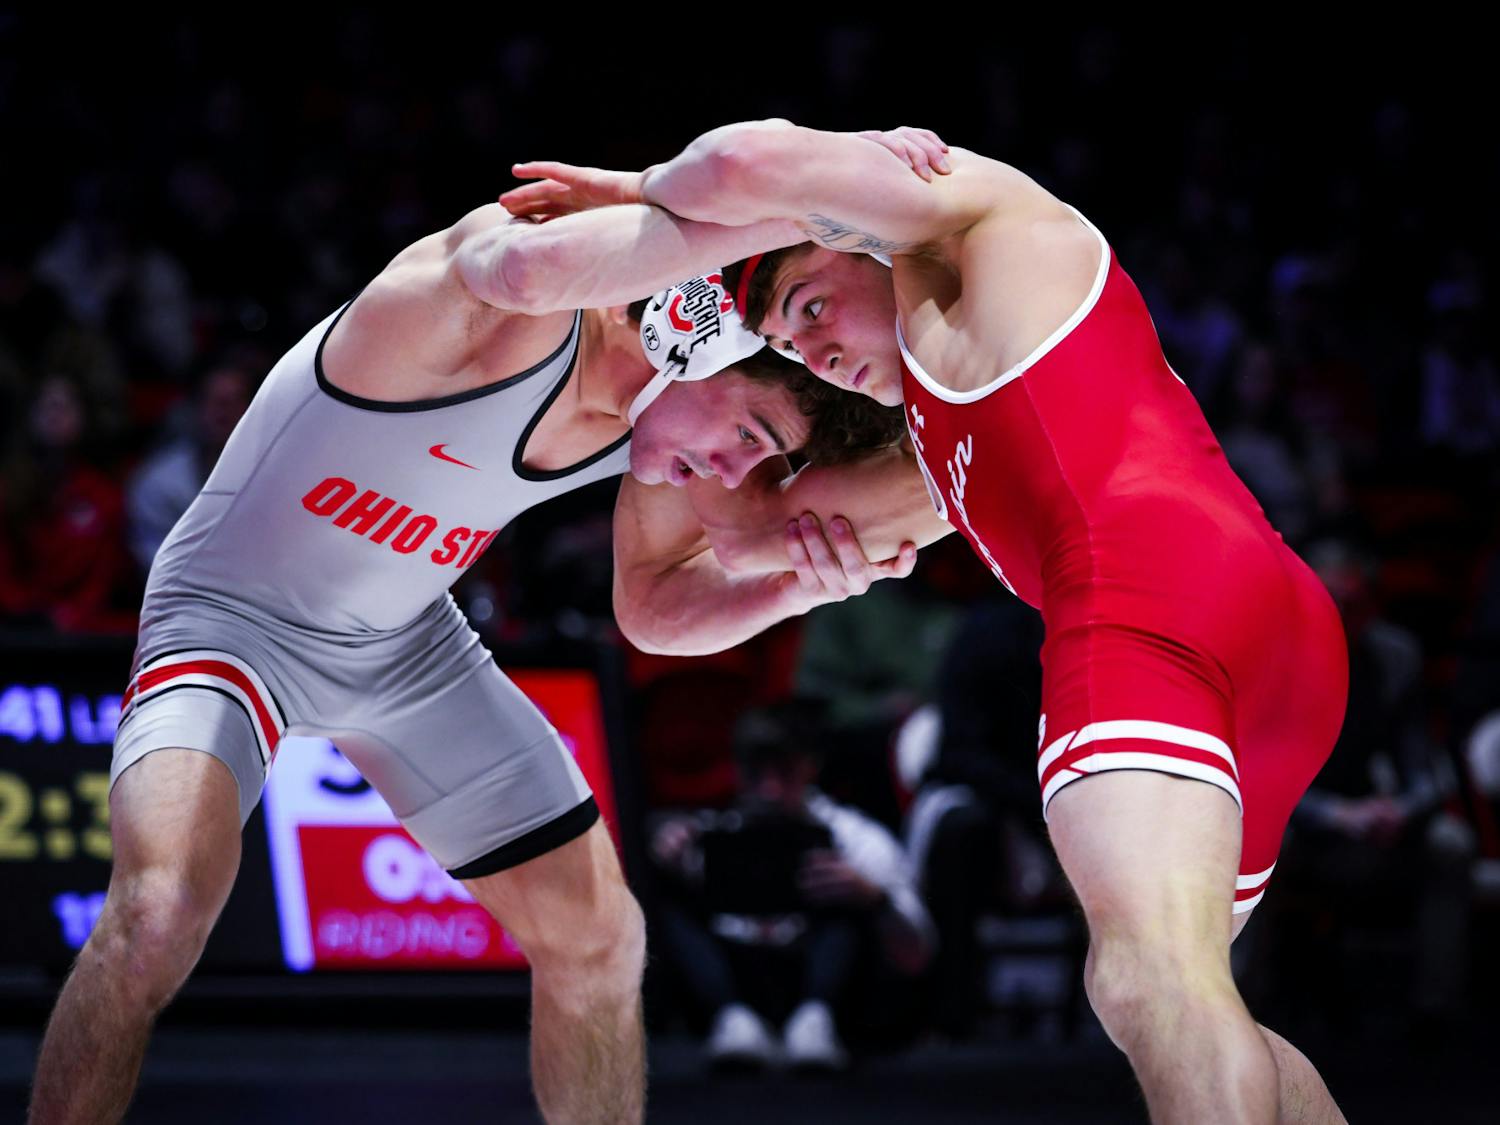 PHOTOS: Wisconsin Wrestling goes head-to-head with Ohio State in 15-27 loss